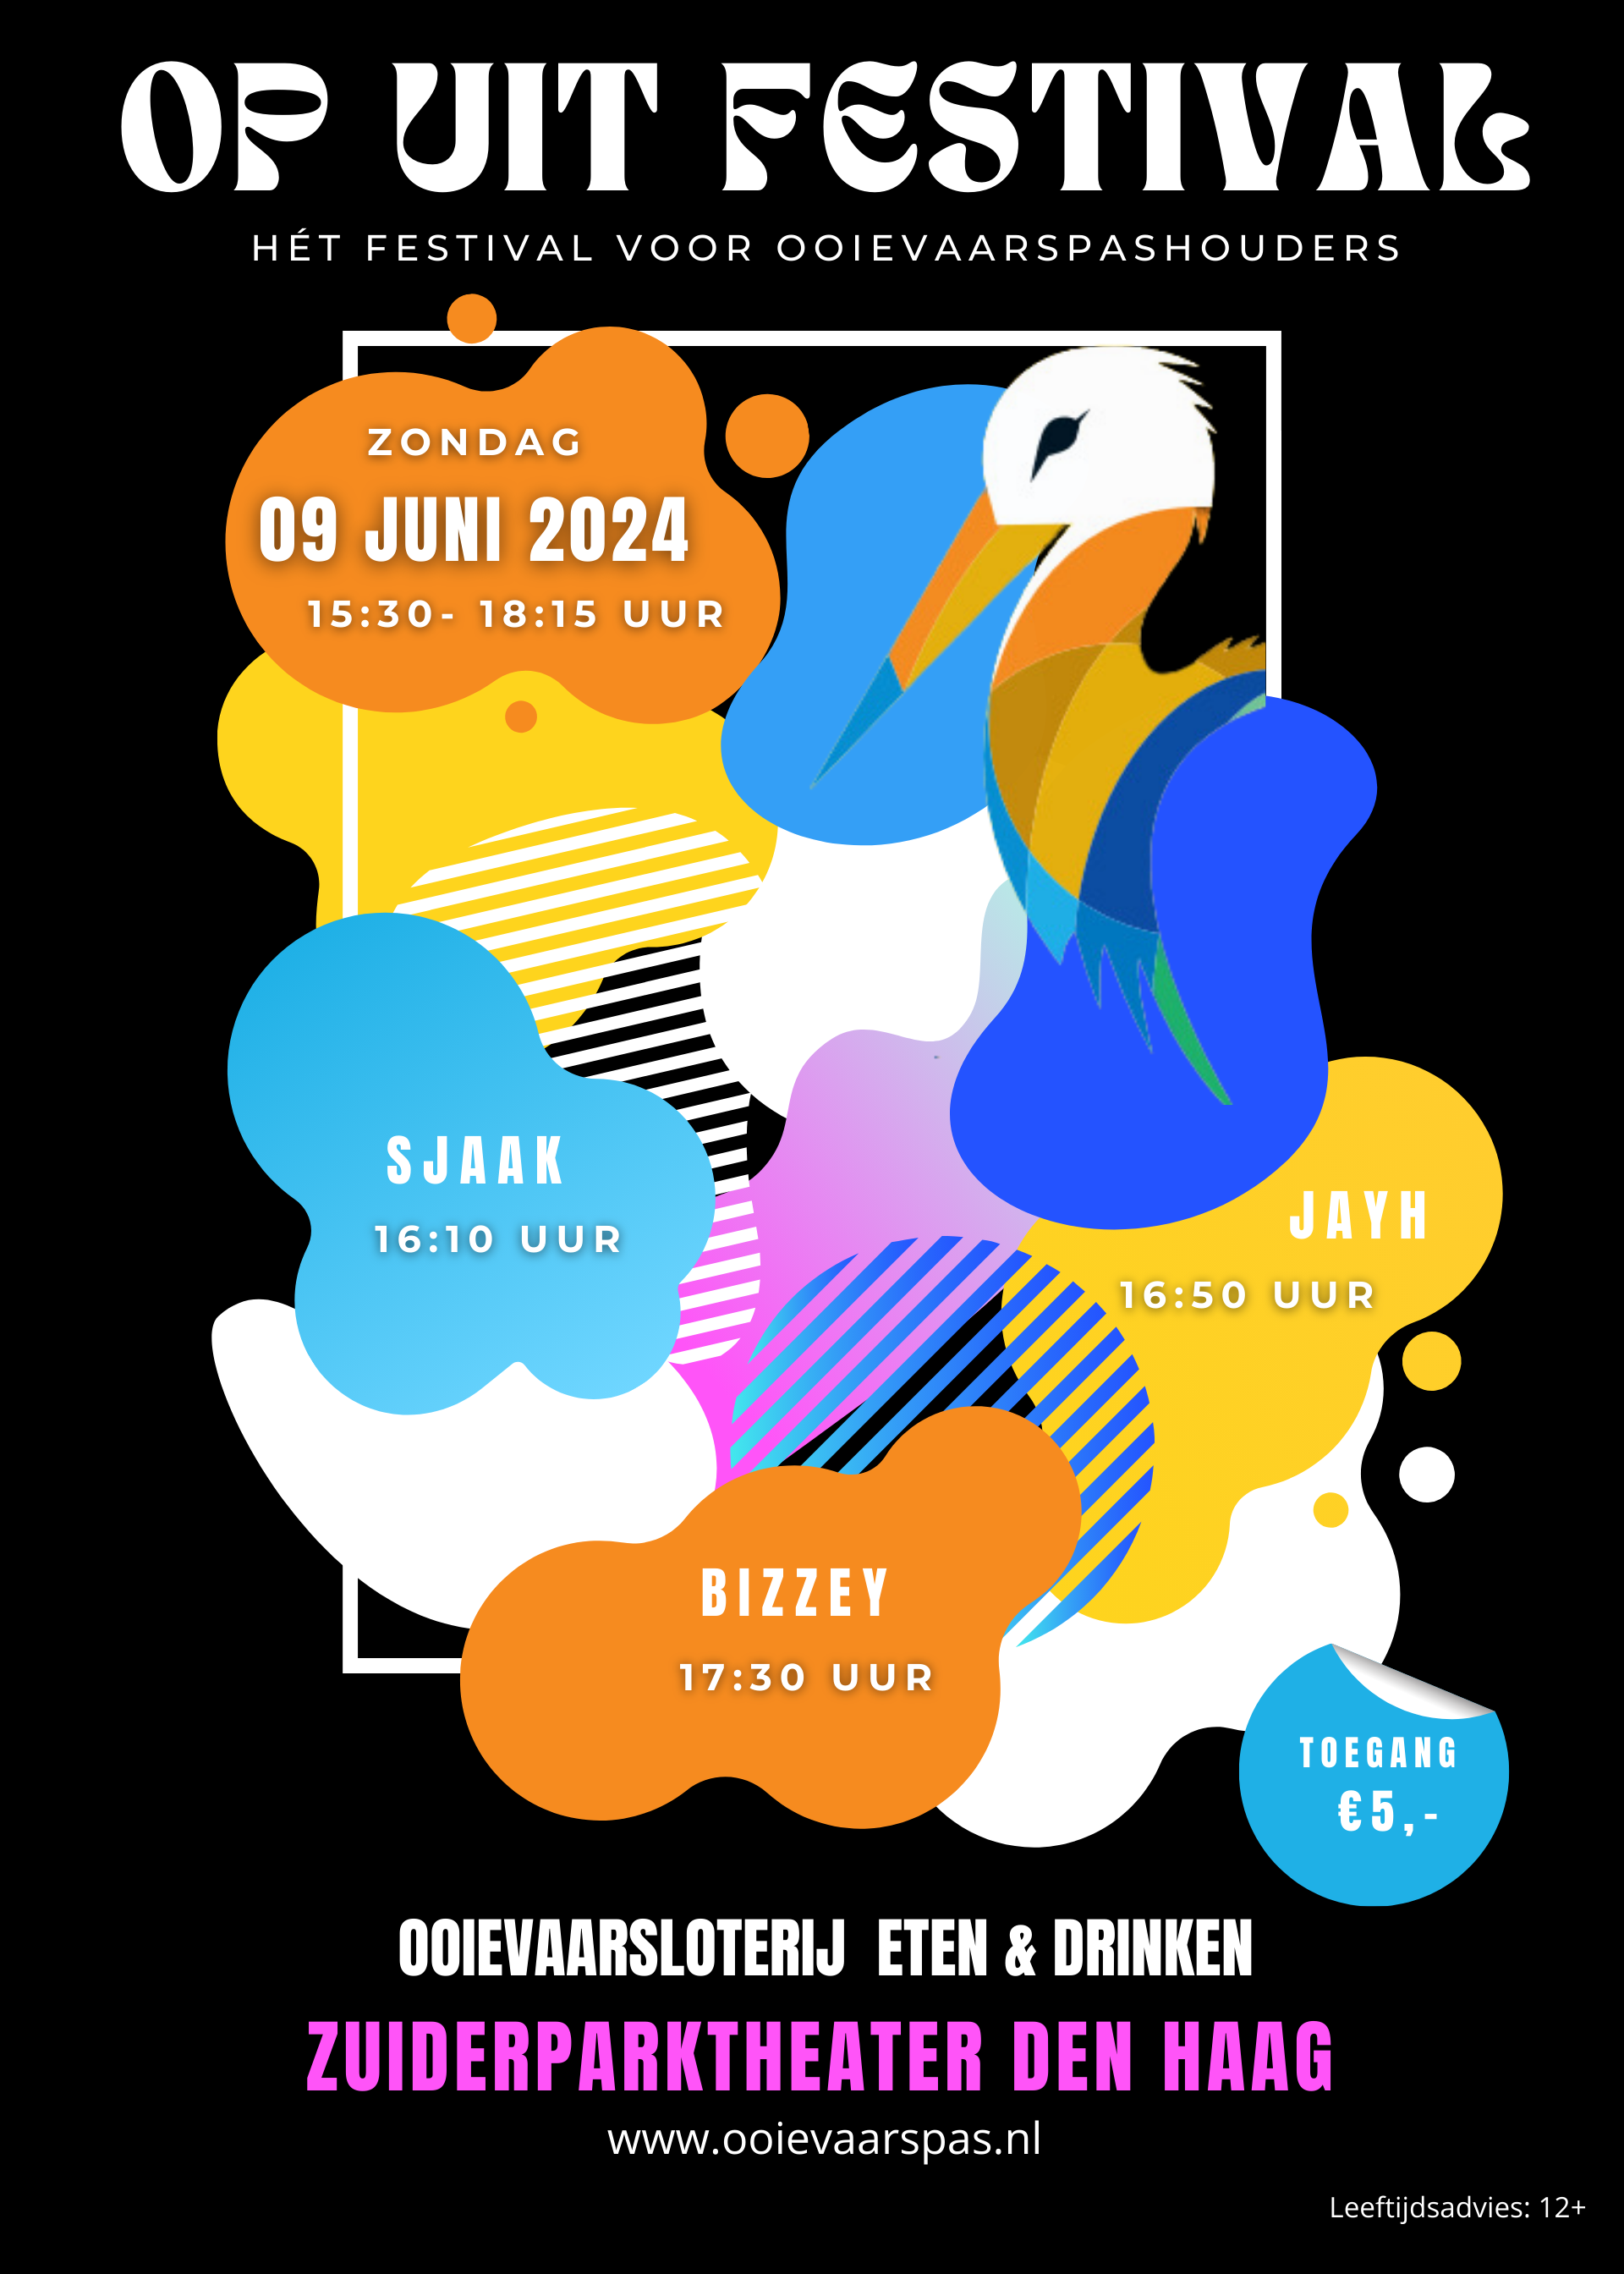 At Uitfestival: Urban programme with Sjaak, Jayh, Bizzey & lottery - ism Ooievaarspas